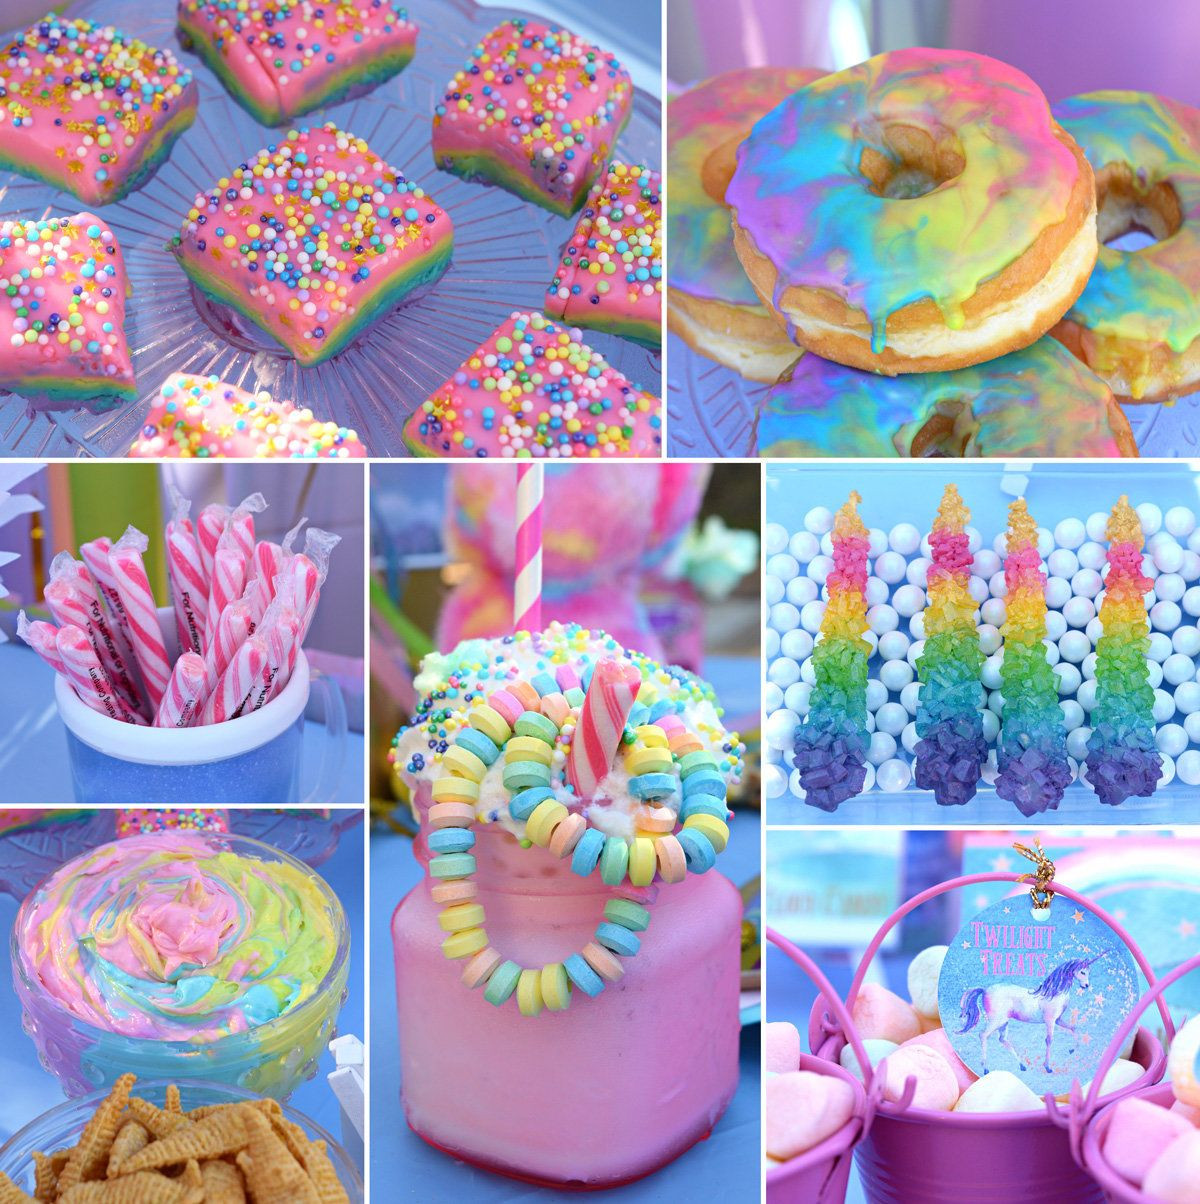 Mermaid And Unicorn Party Ideas
 Unicorn food Party Ideas in 2019